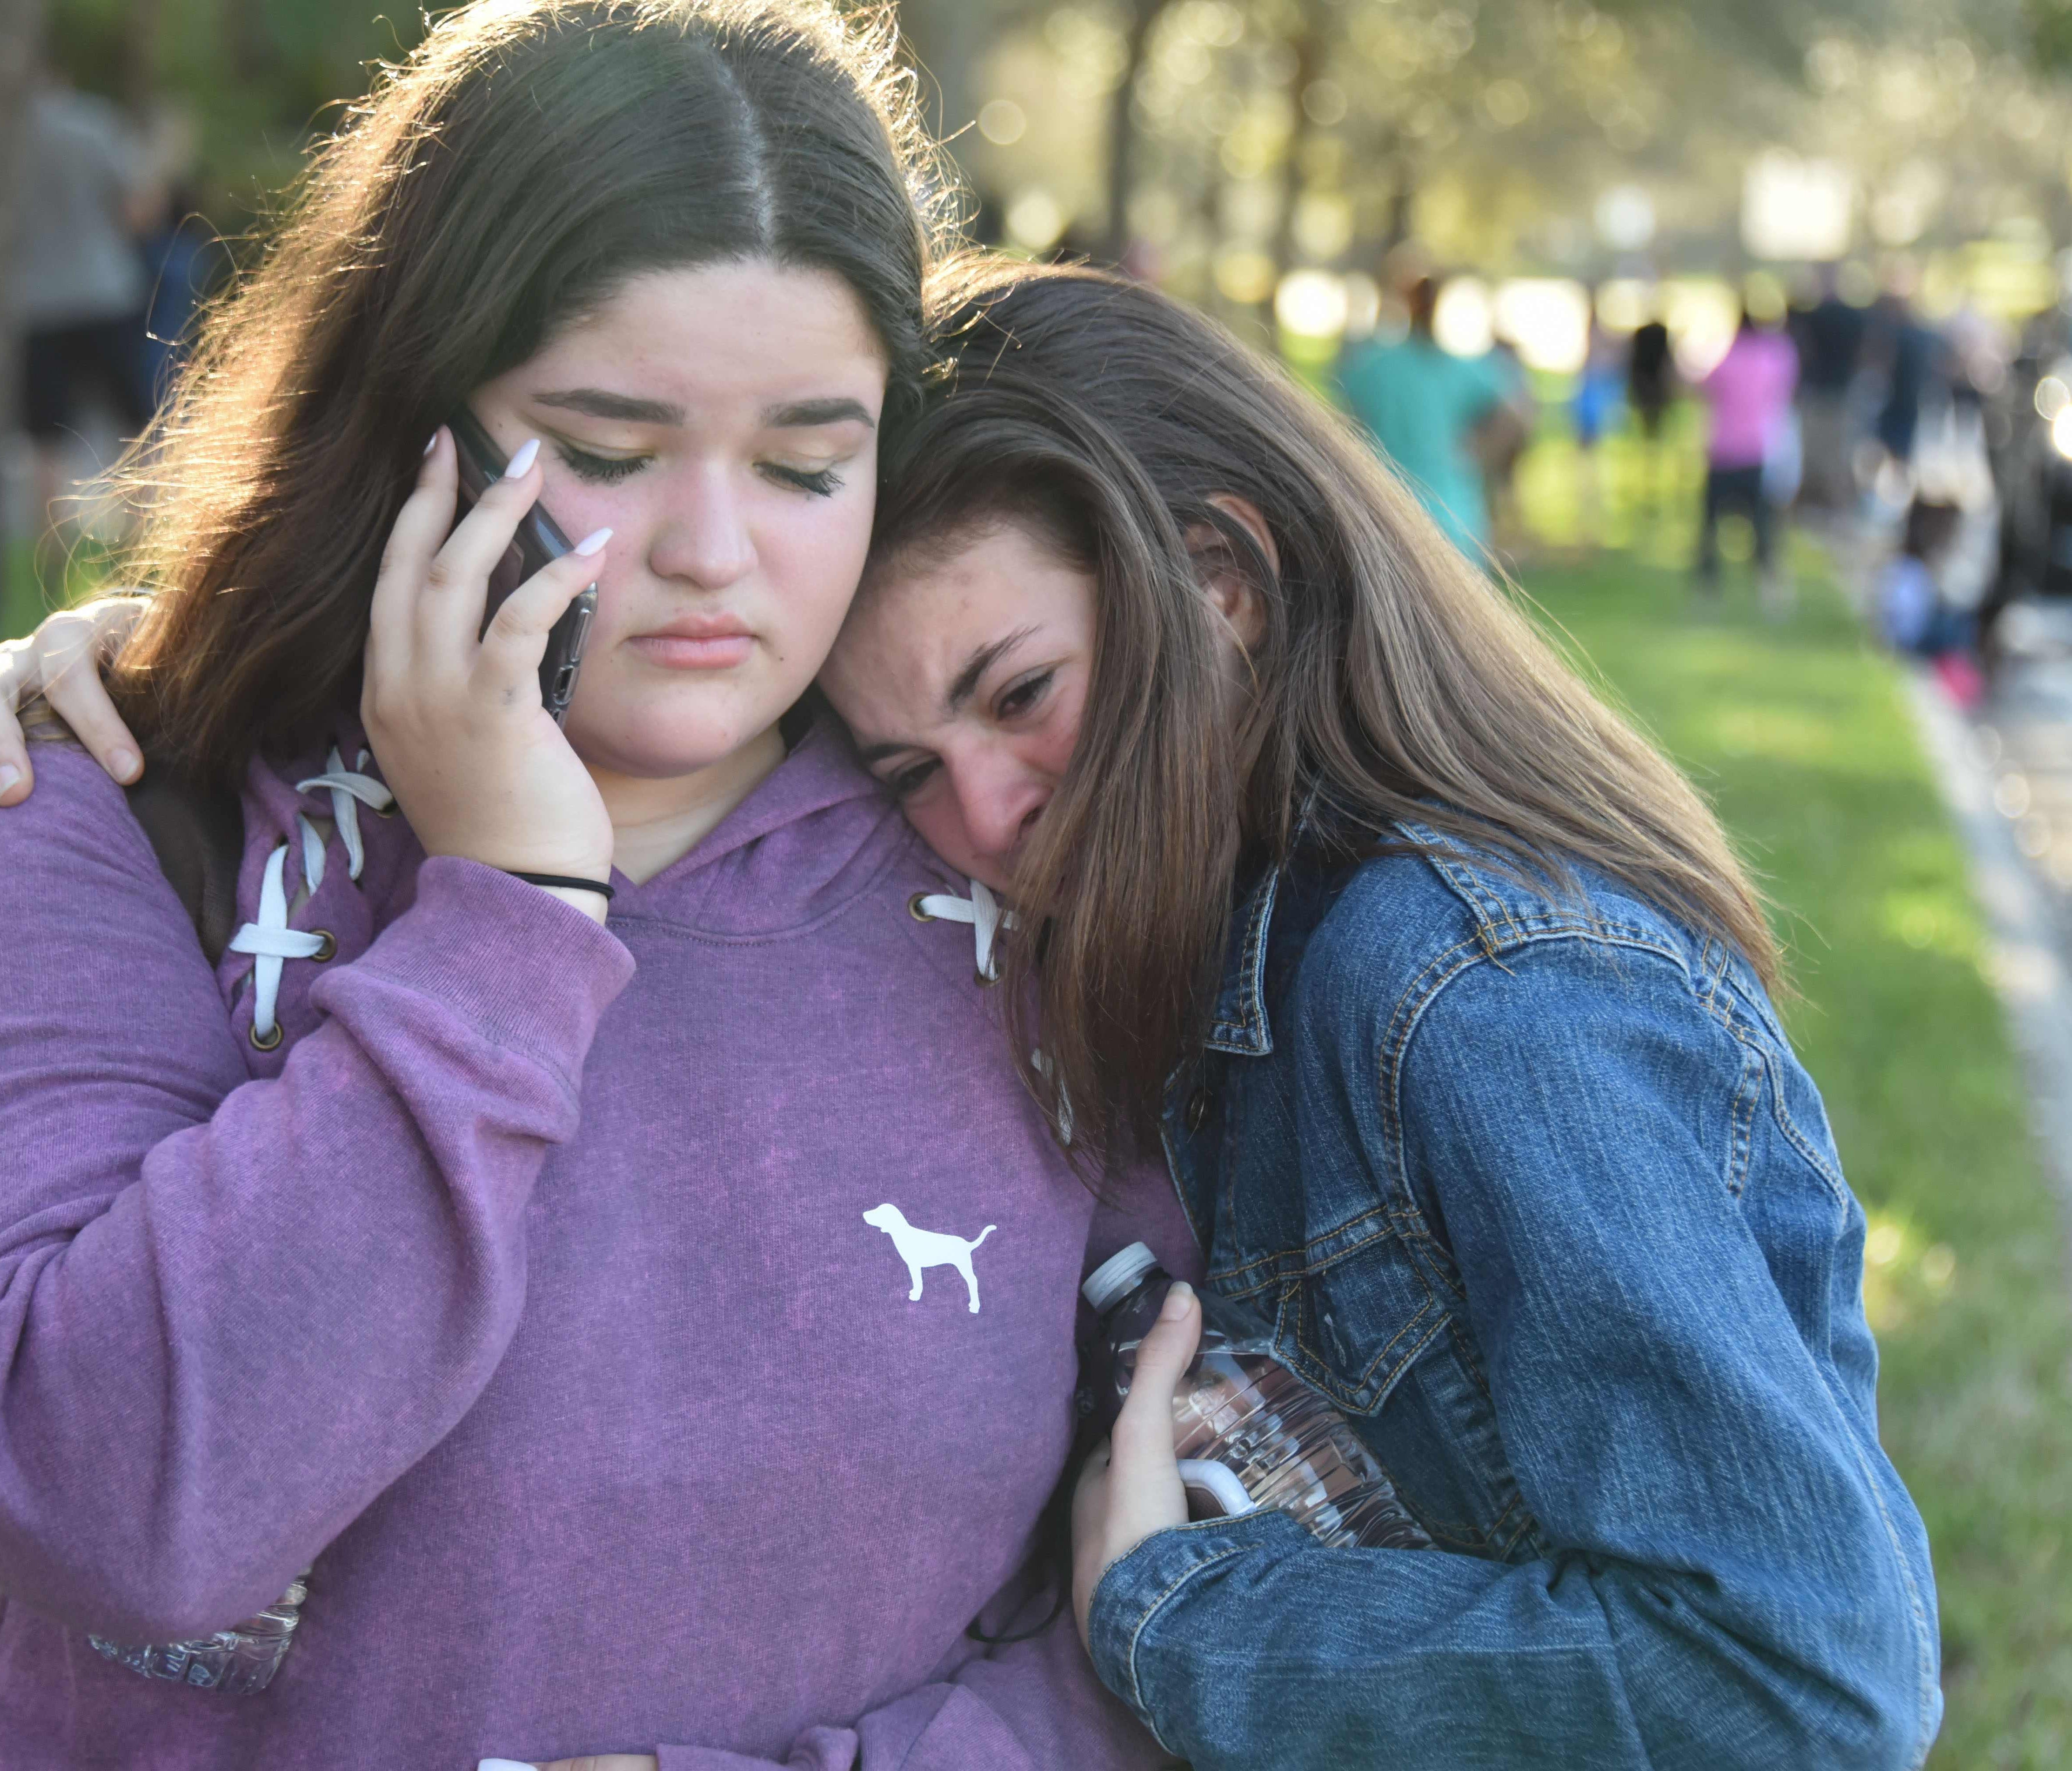 Students react following a shooting at Marjory Stoneman Douglas High School in Parkland, Fla., a city about 50 miles north of Miami.